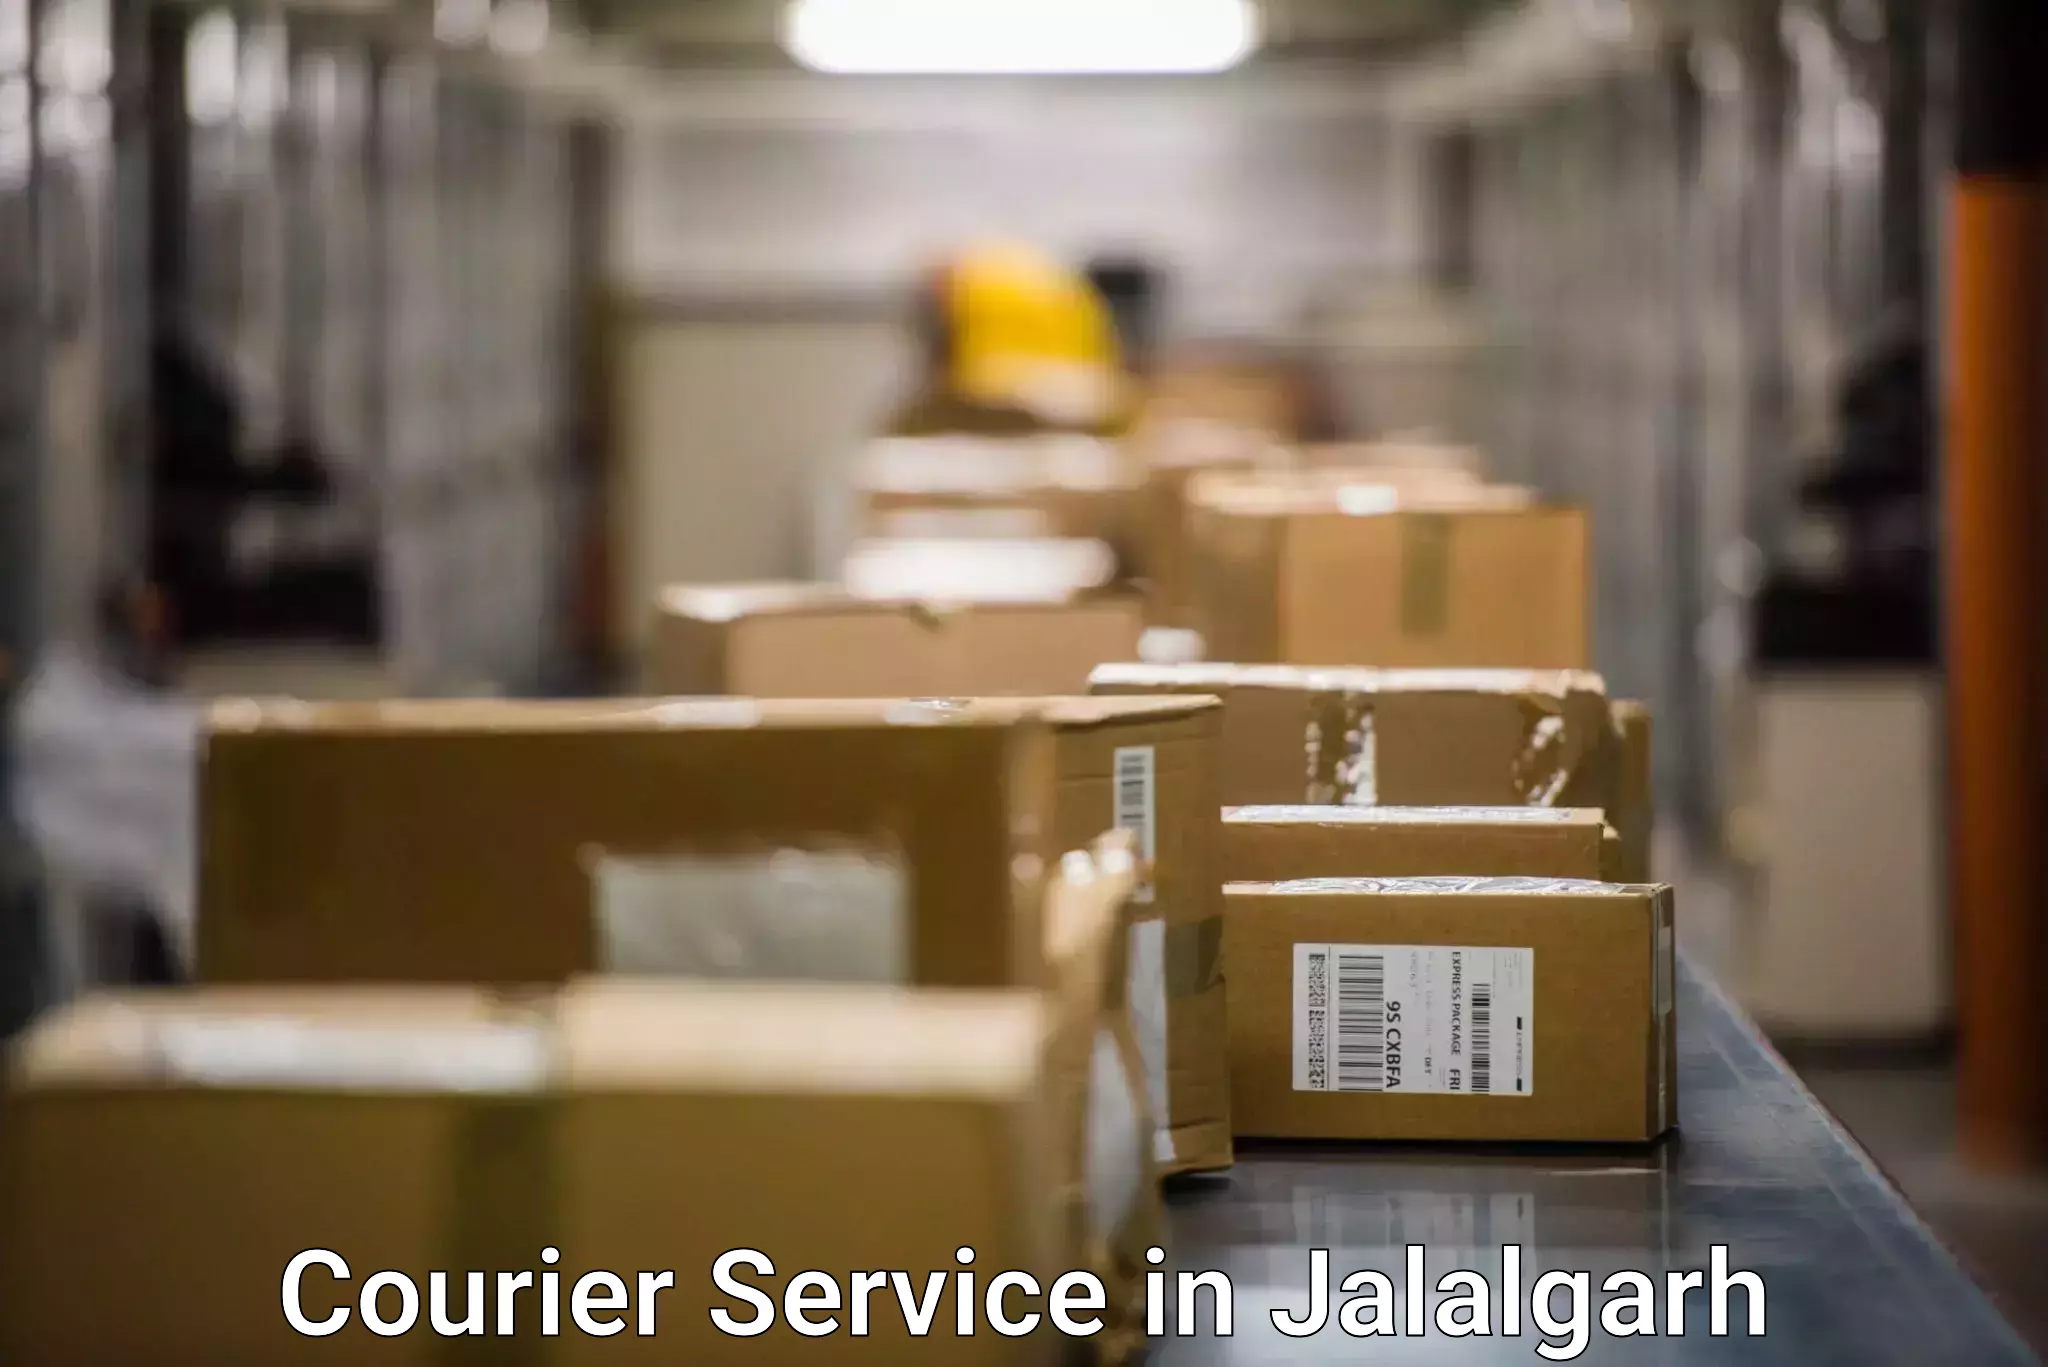 Optimized delivery routes in Jalalgarh